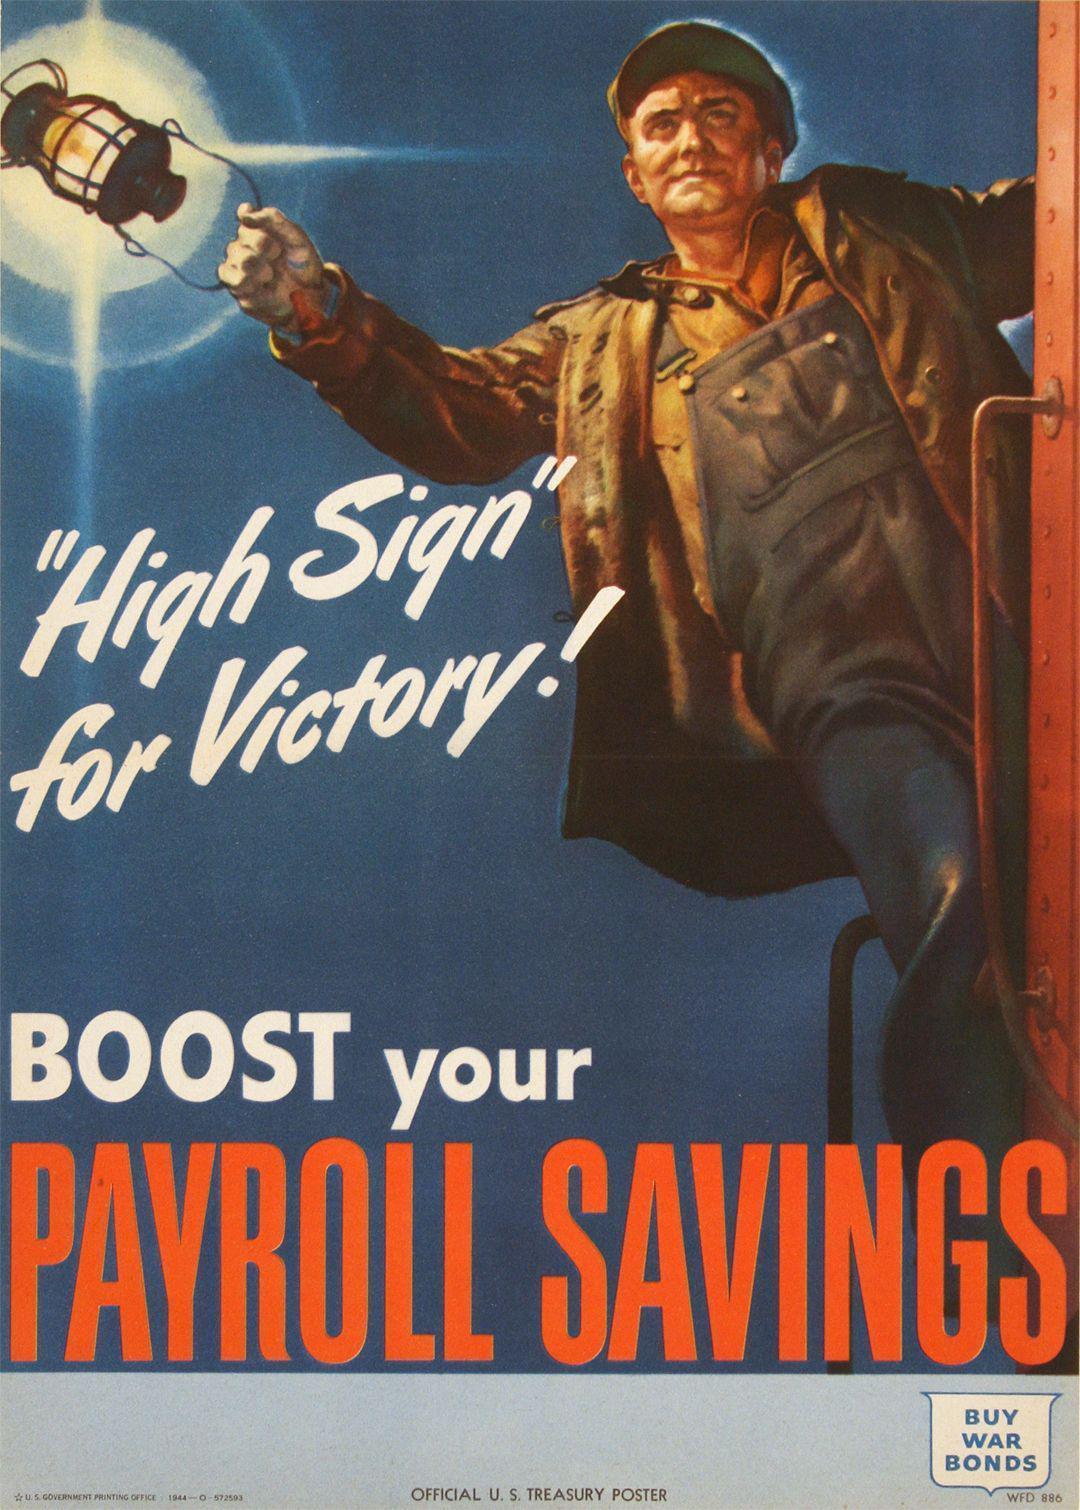 Original WWII Poster - High Sign for Victory Payroll Savings 1944